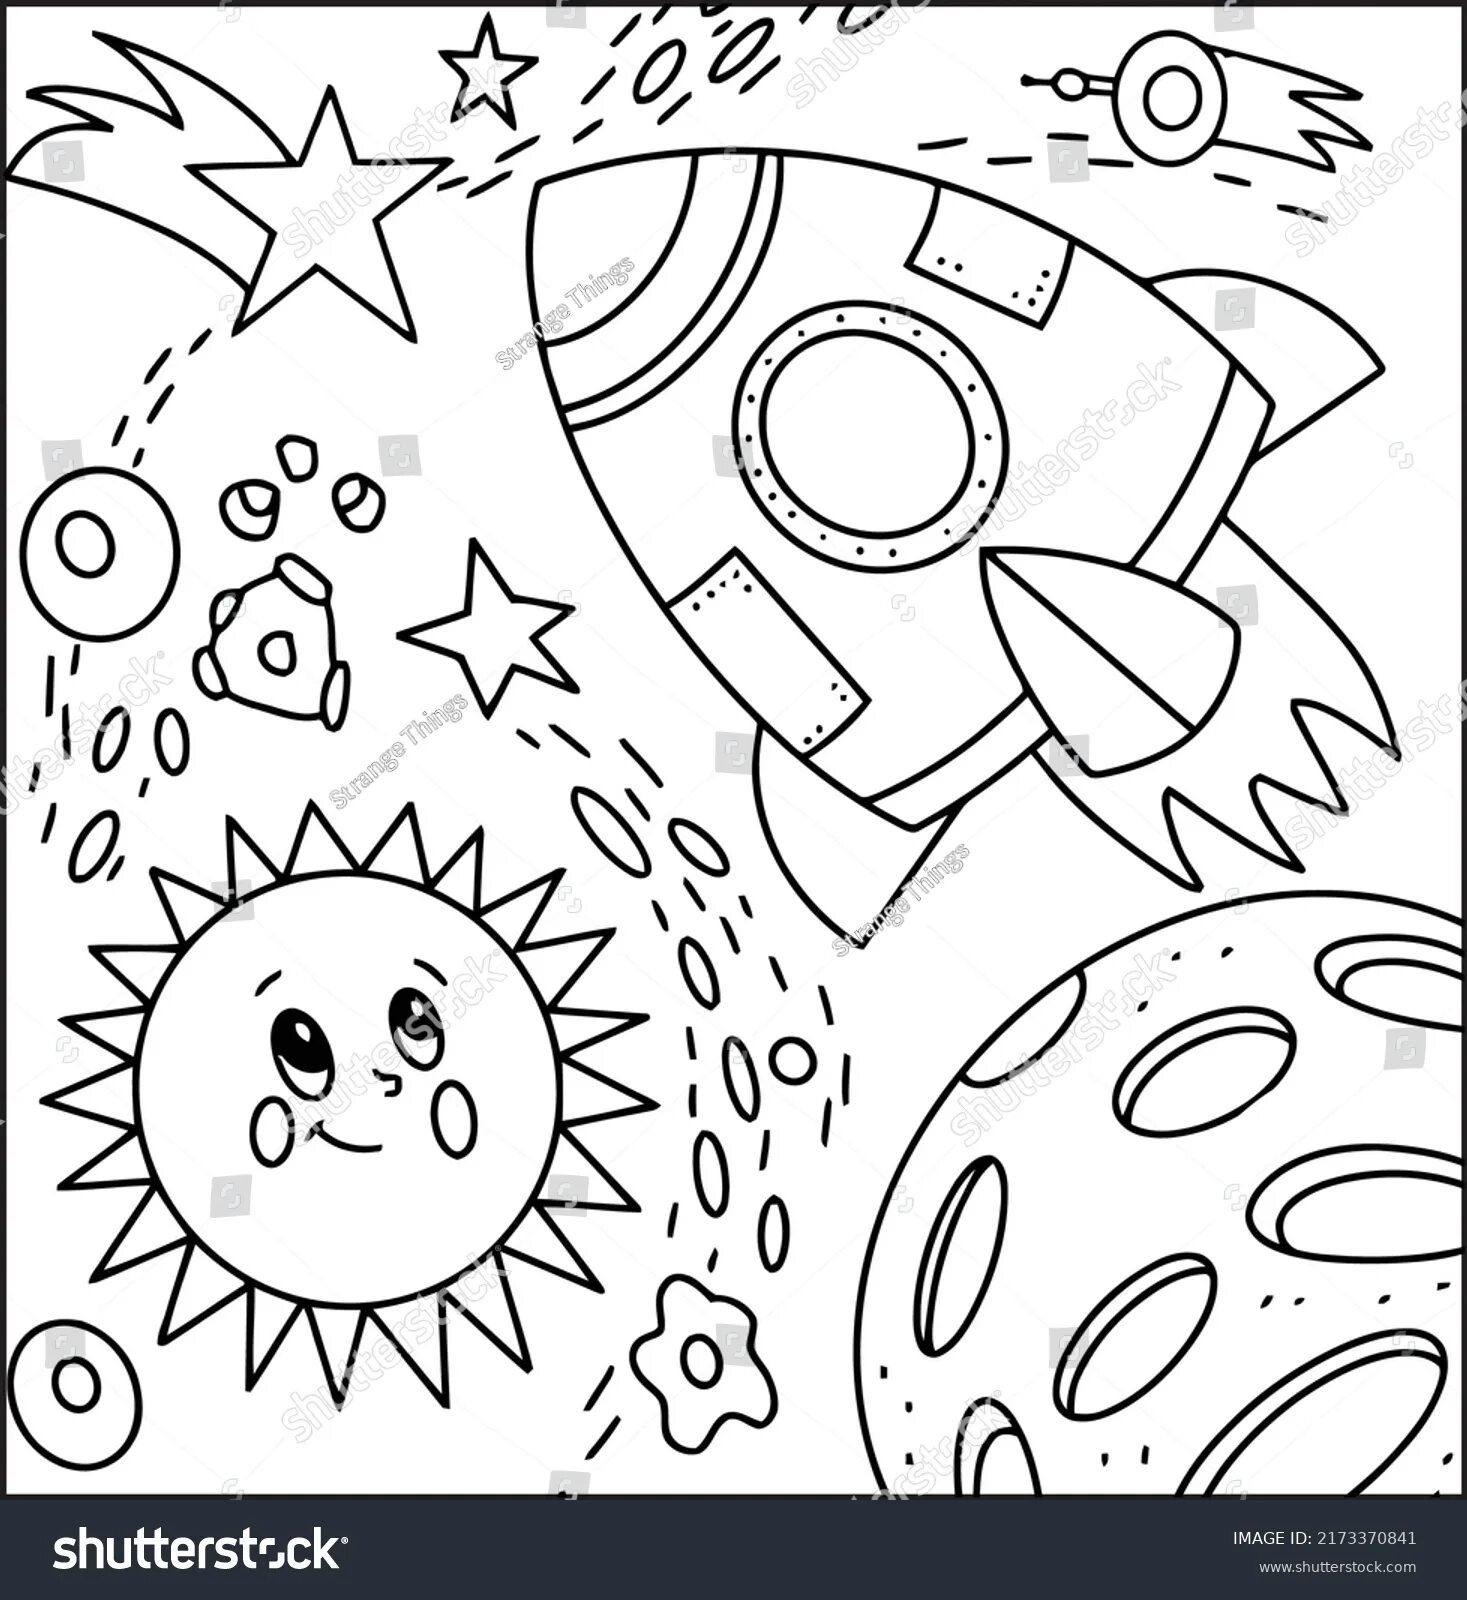 Fairy 1st grade space coloring book